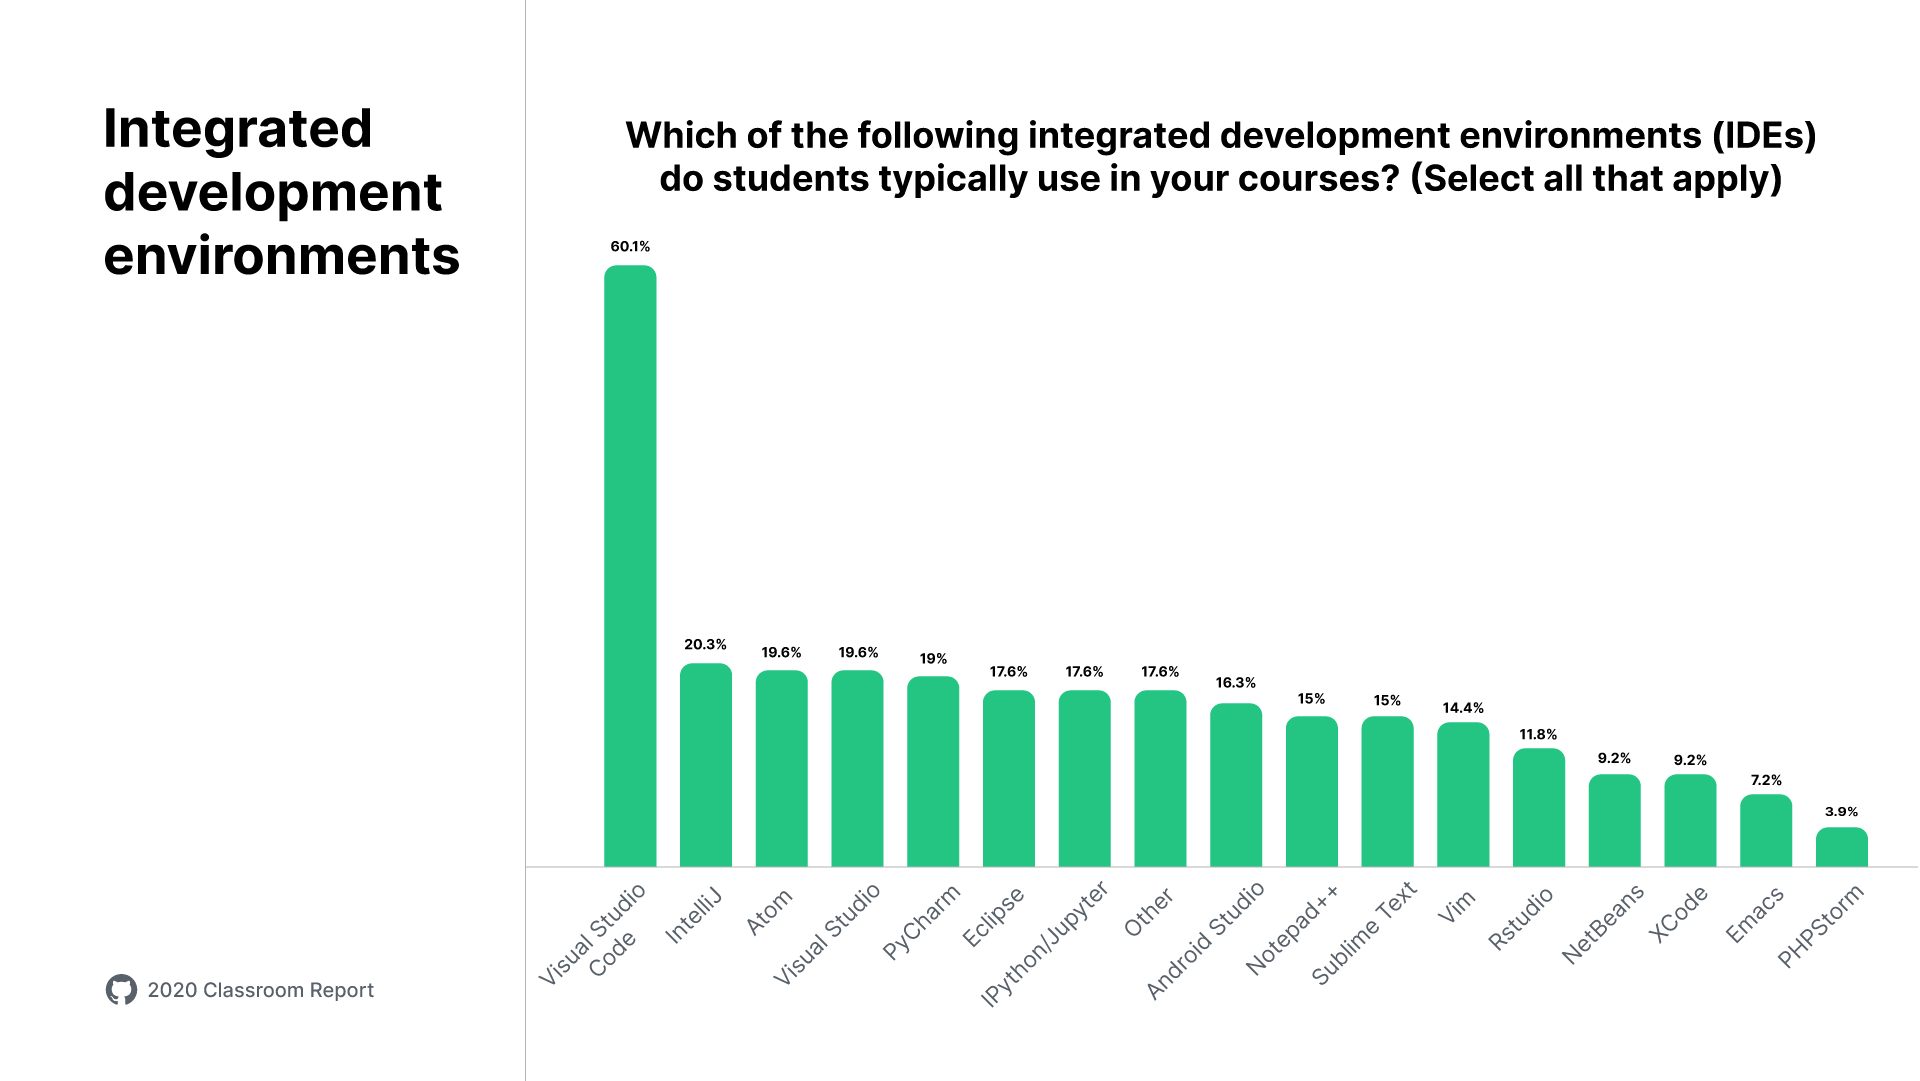 A chart with results for the question 'Which of the following IDEs do students typically use in your courses (select all that apply)'